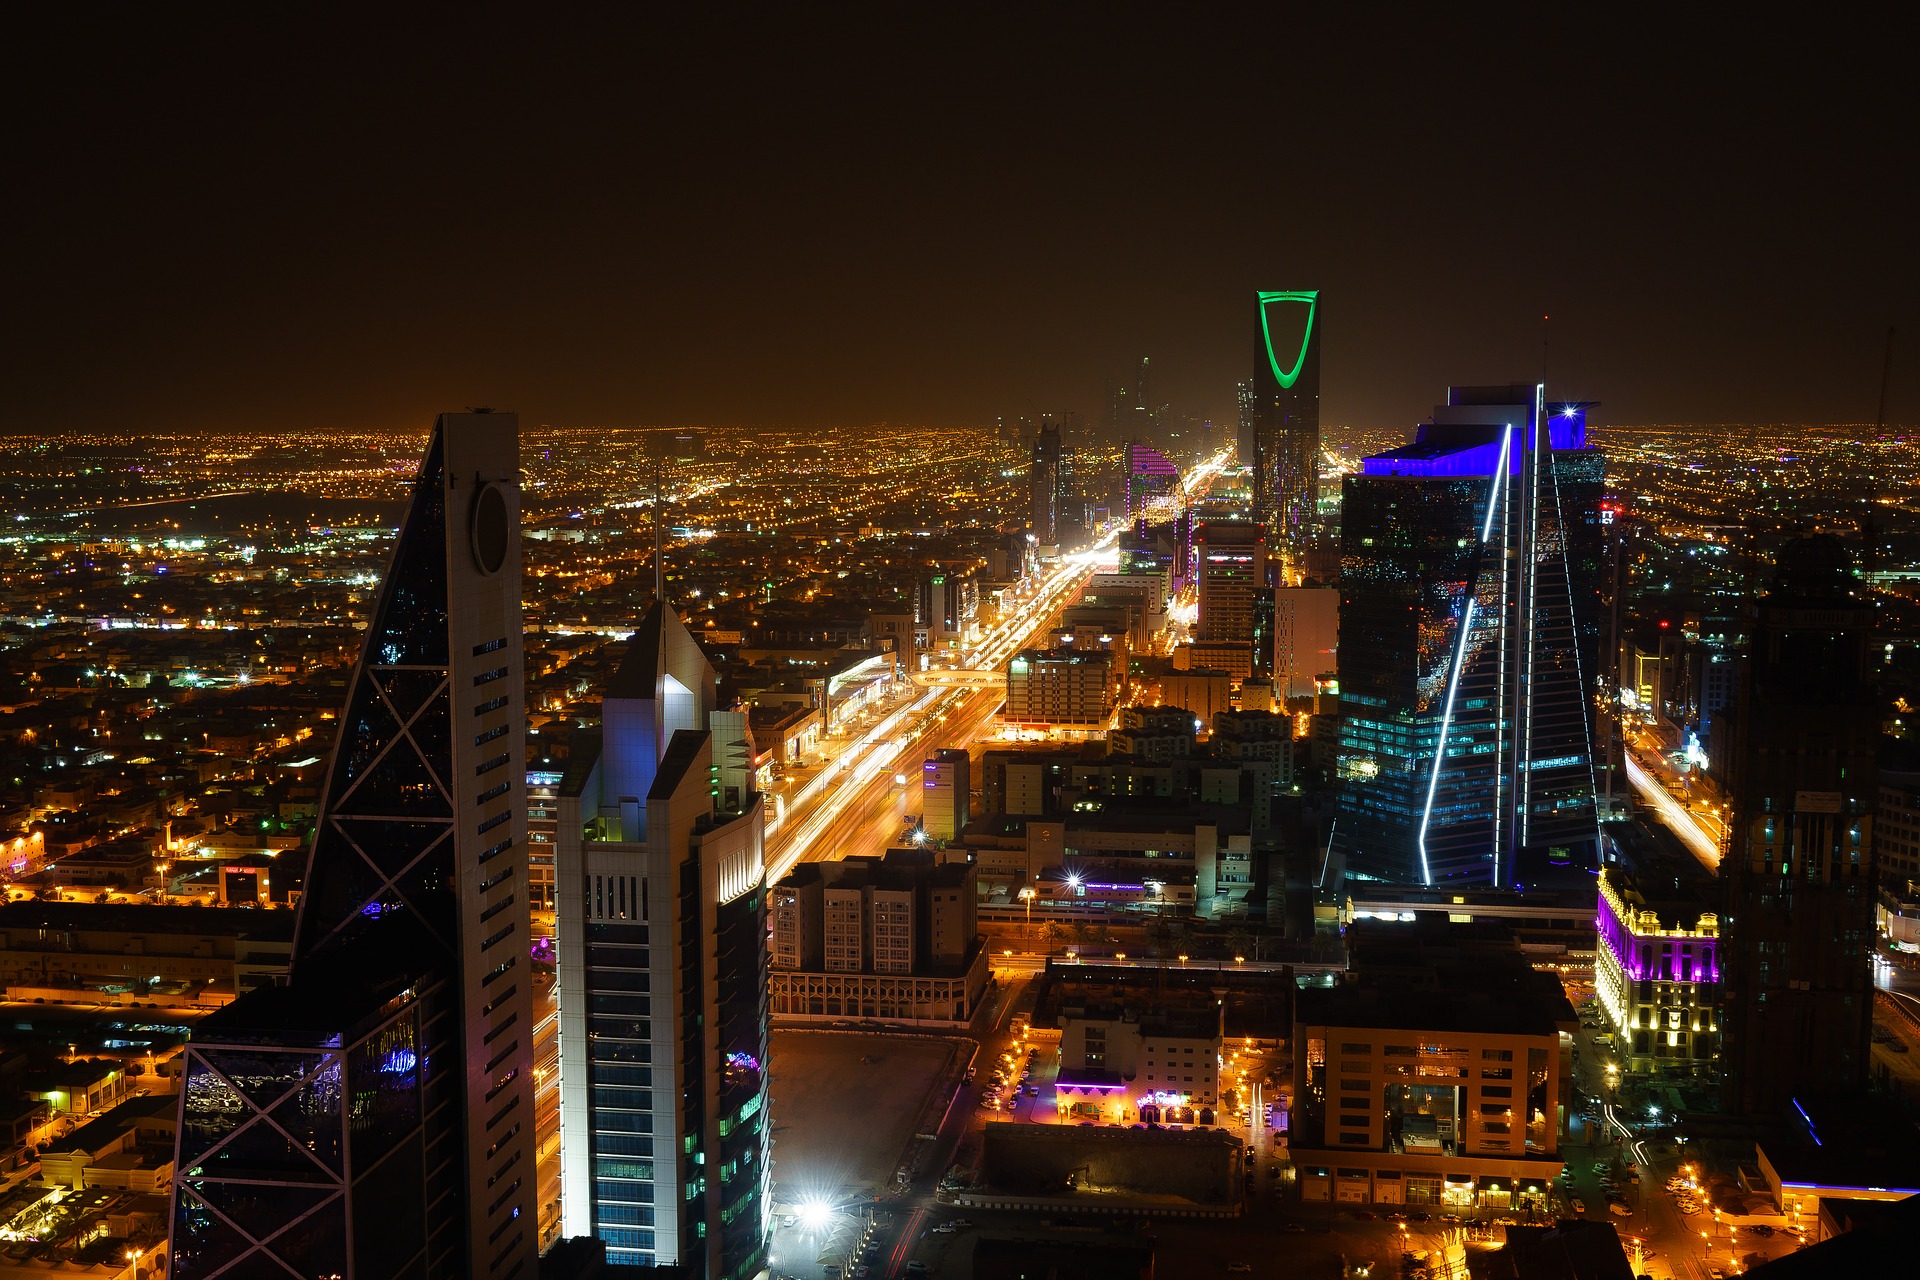 Saudi Arabia- Is this the world’s newest, most controversial travel destination?